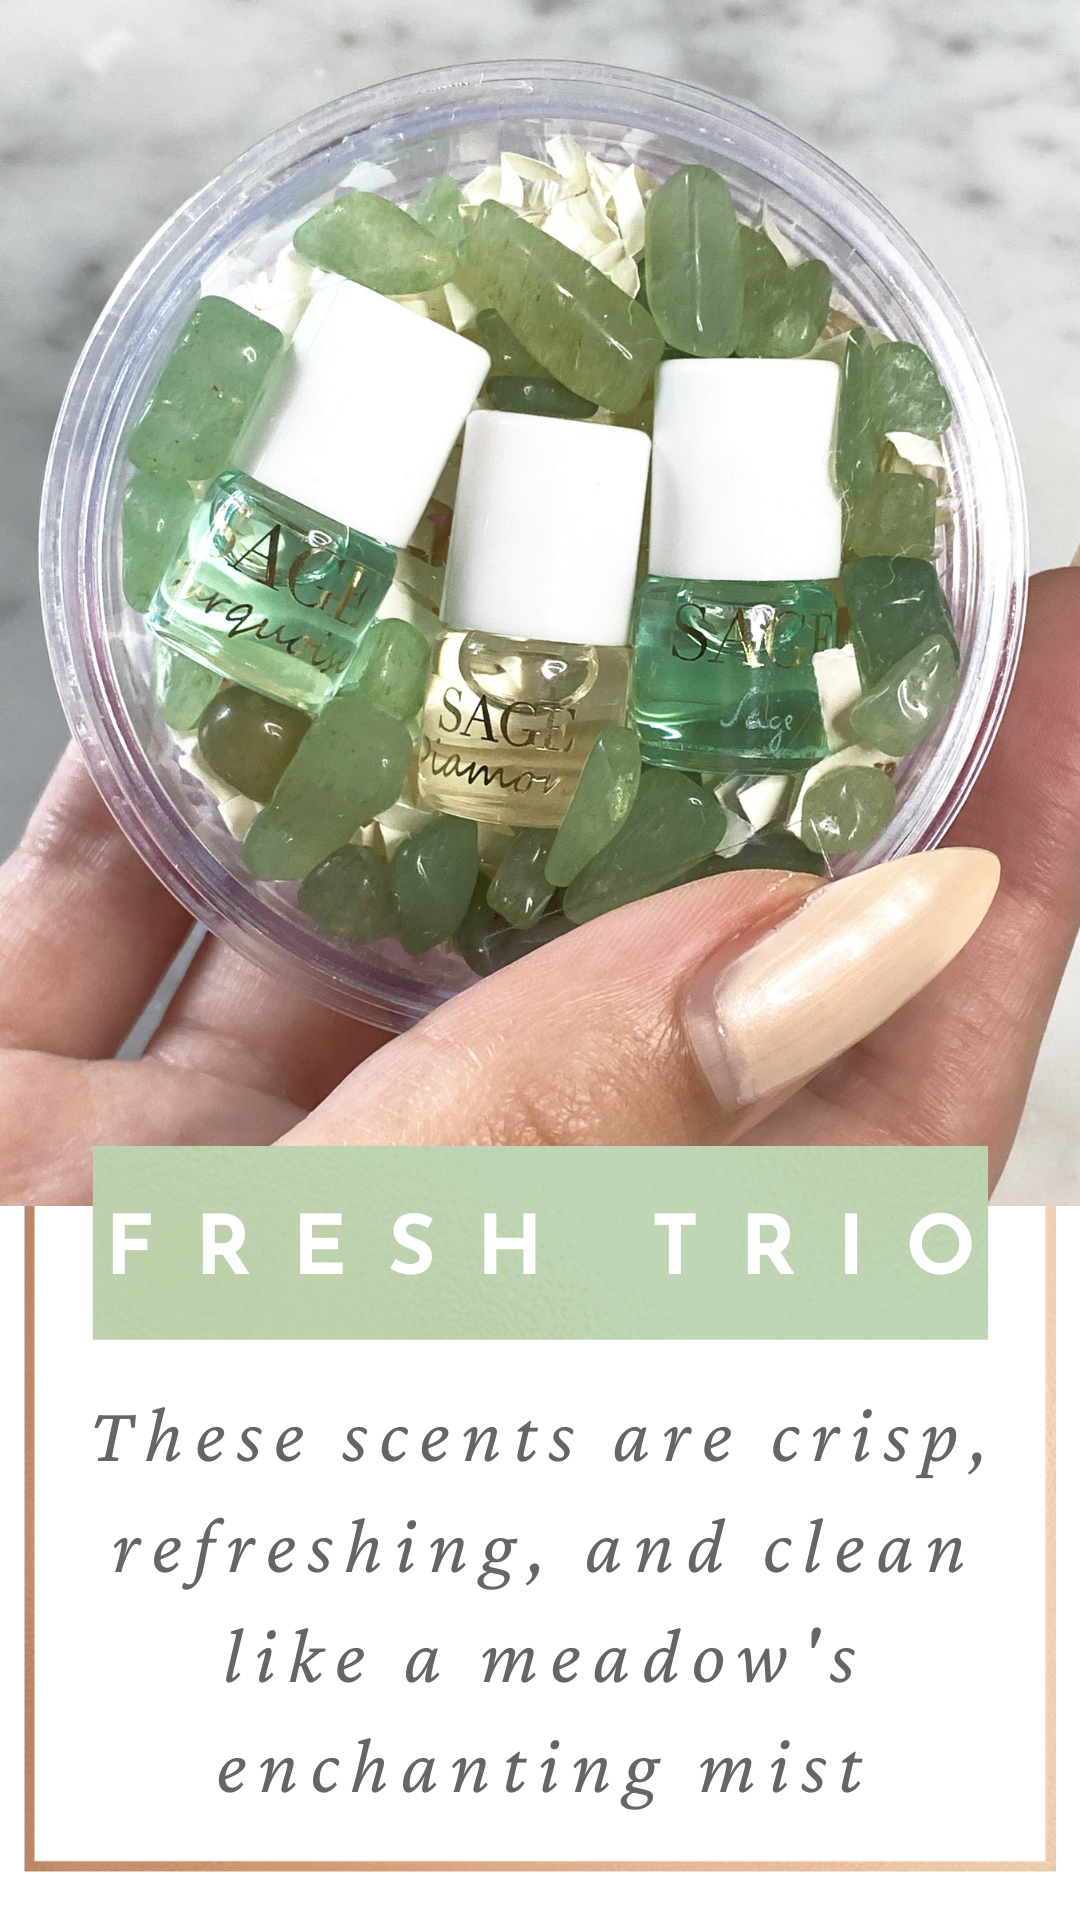 Word fresh trio these scents are crispy refreshinga and clean like a meadows enchanting mist. On a picture of Turquoise ,Diamond and Sage mini rollie glass bottle with white cap in a plastic container filled with green gemstones being held by a women’s hand.